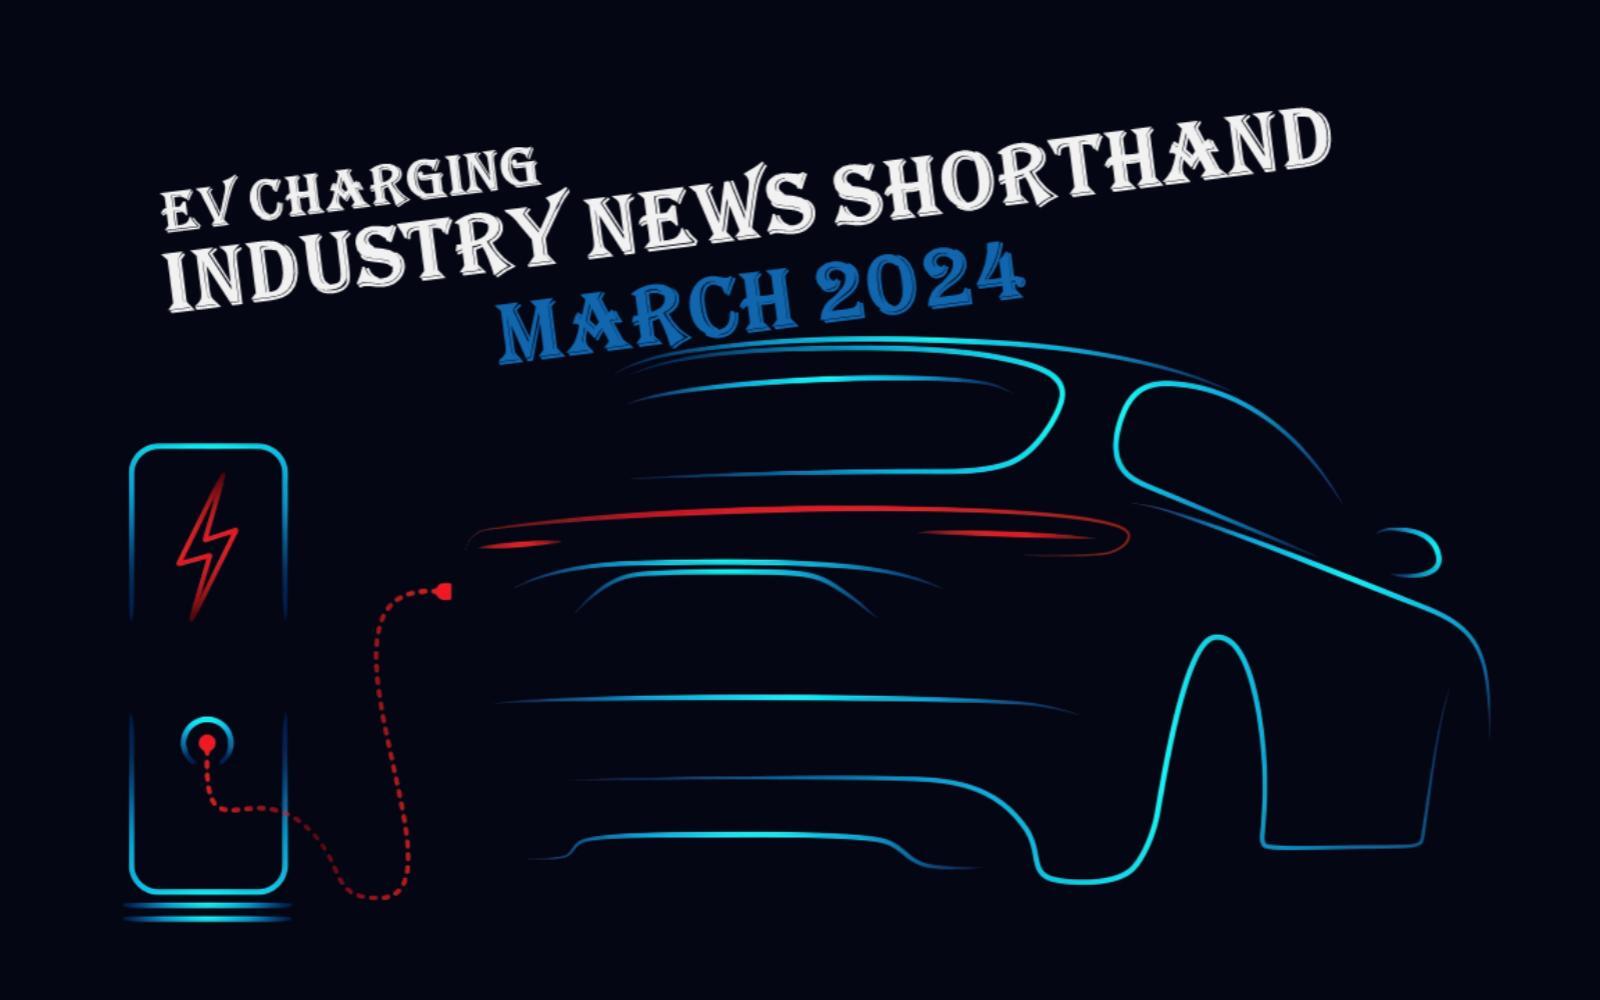 March 2024 EV charging industry news summary